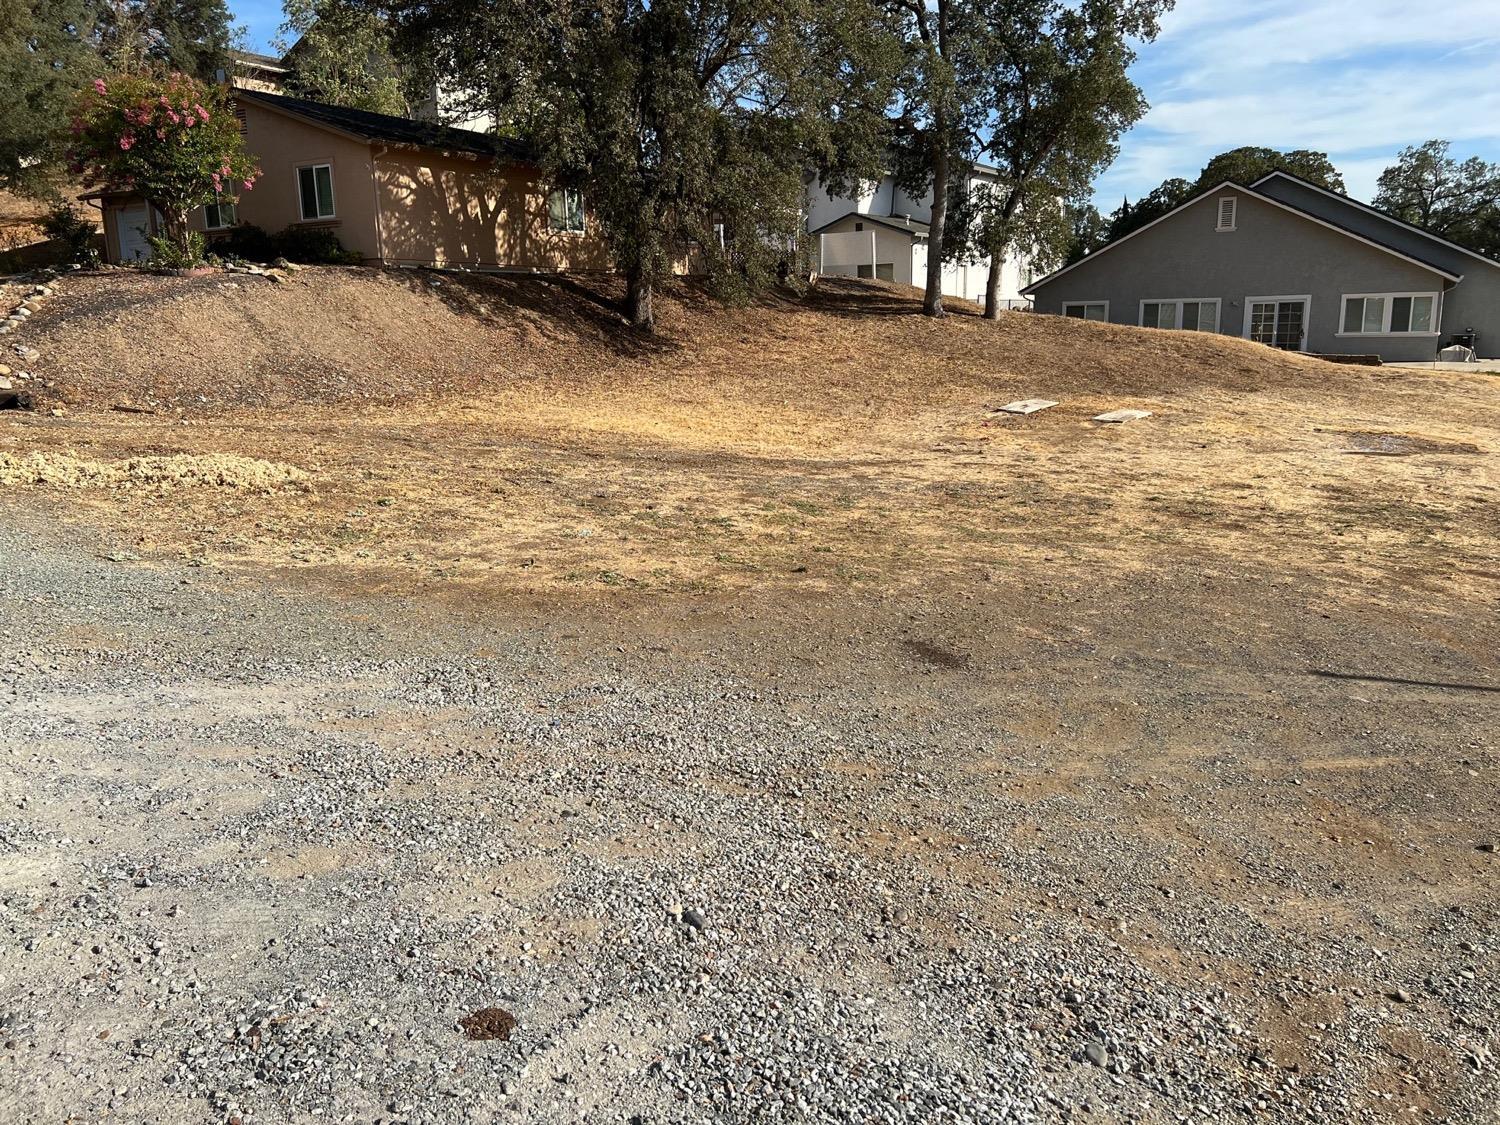 Photo of 332 Poker Flat Rd in Copperopolis, CA